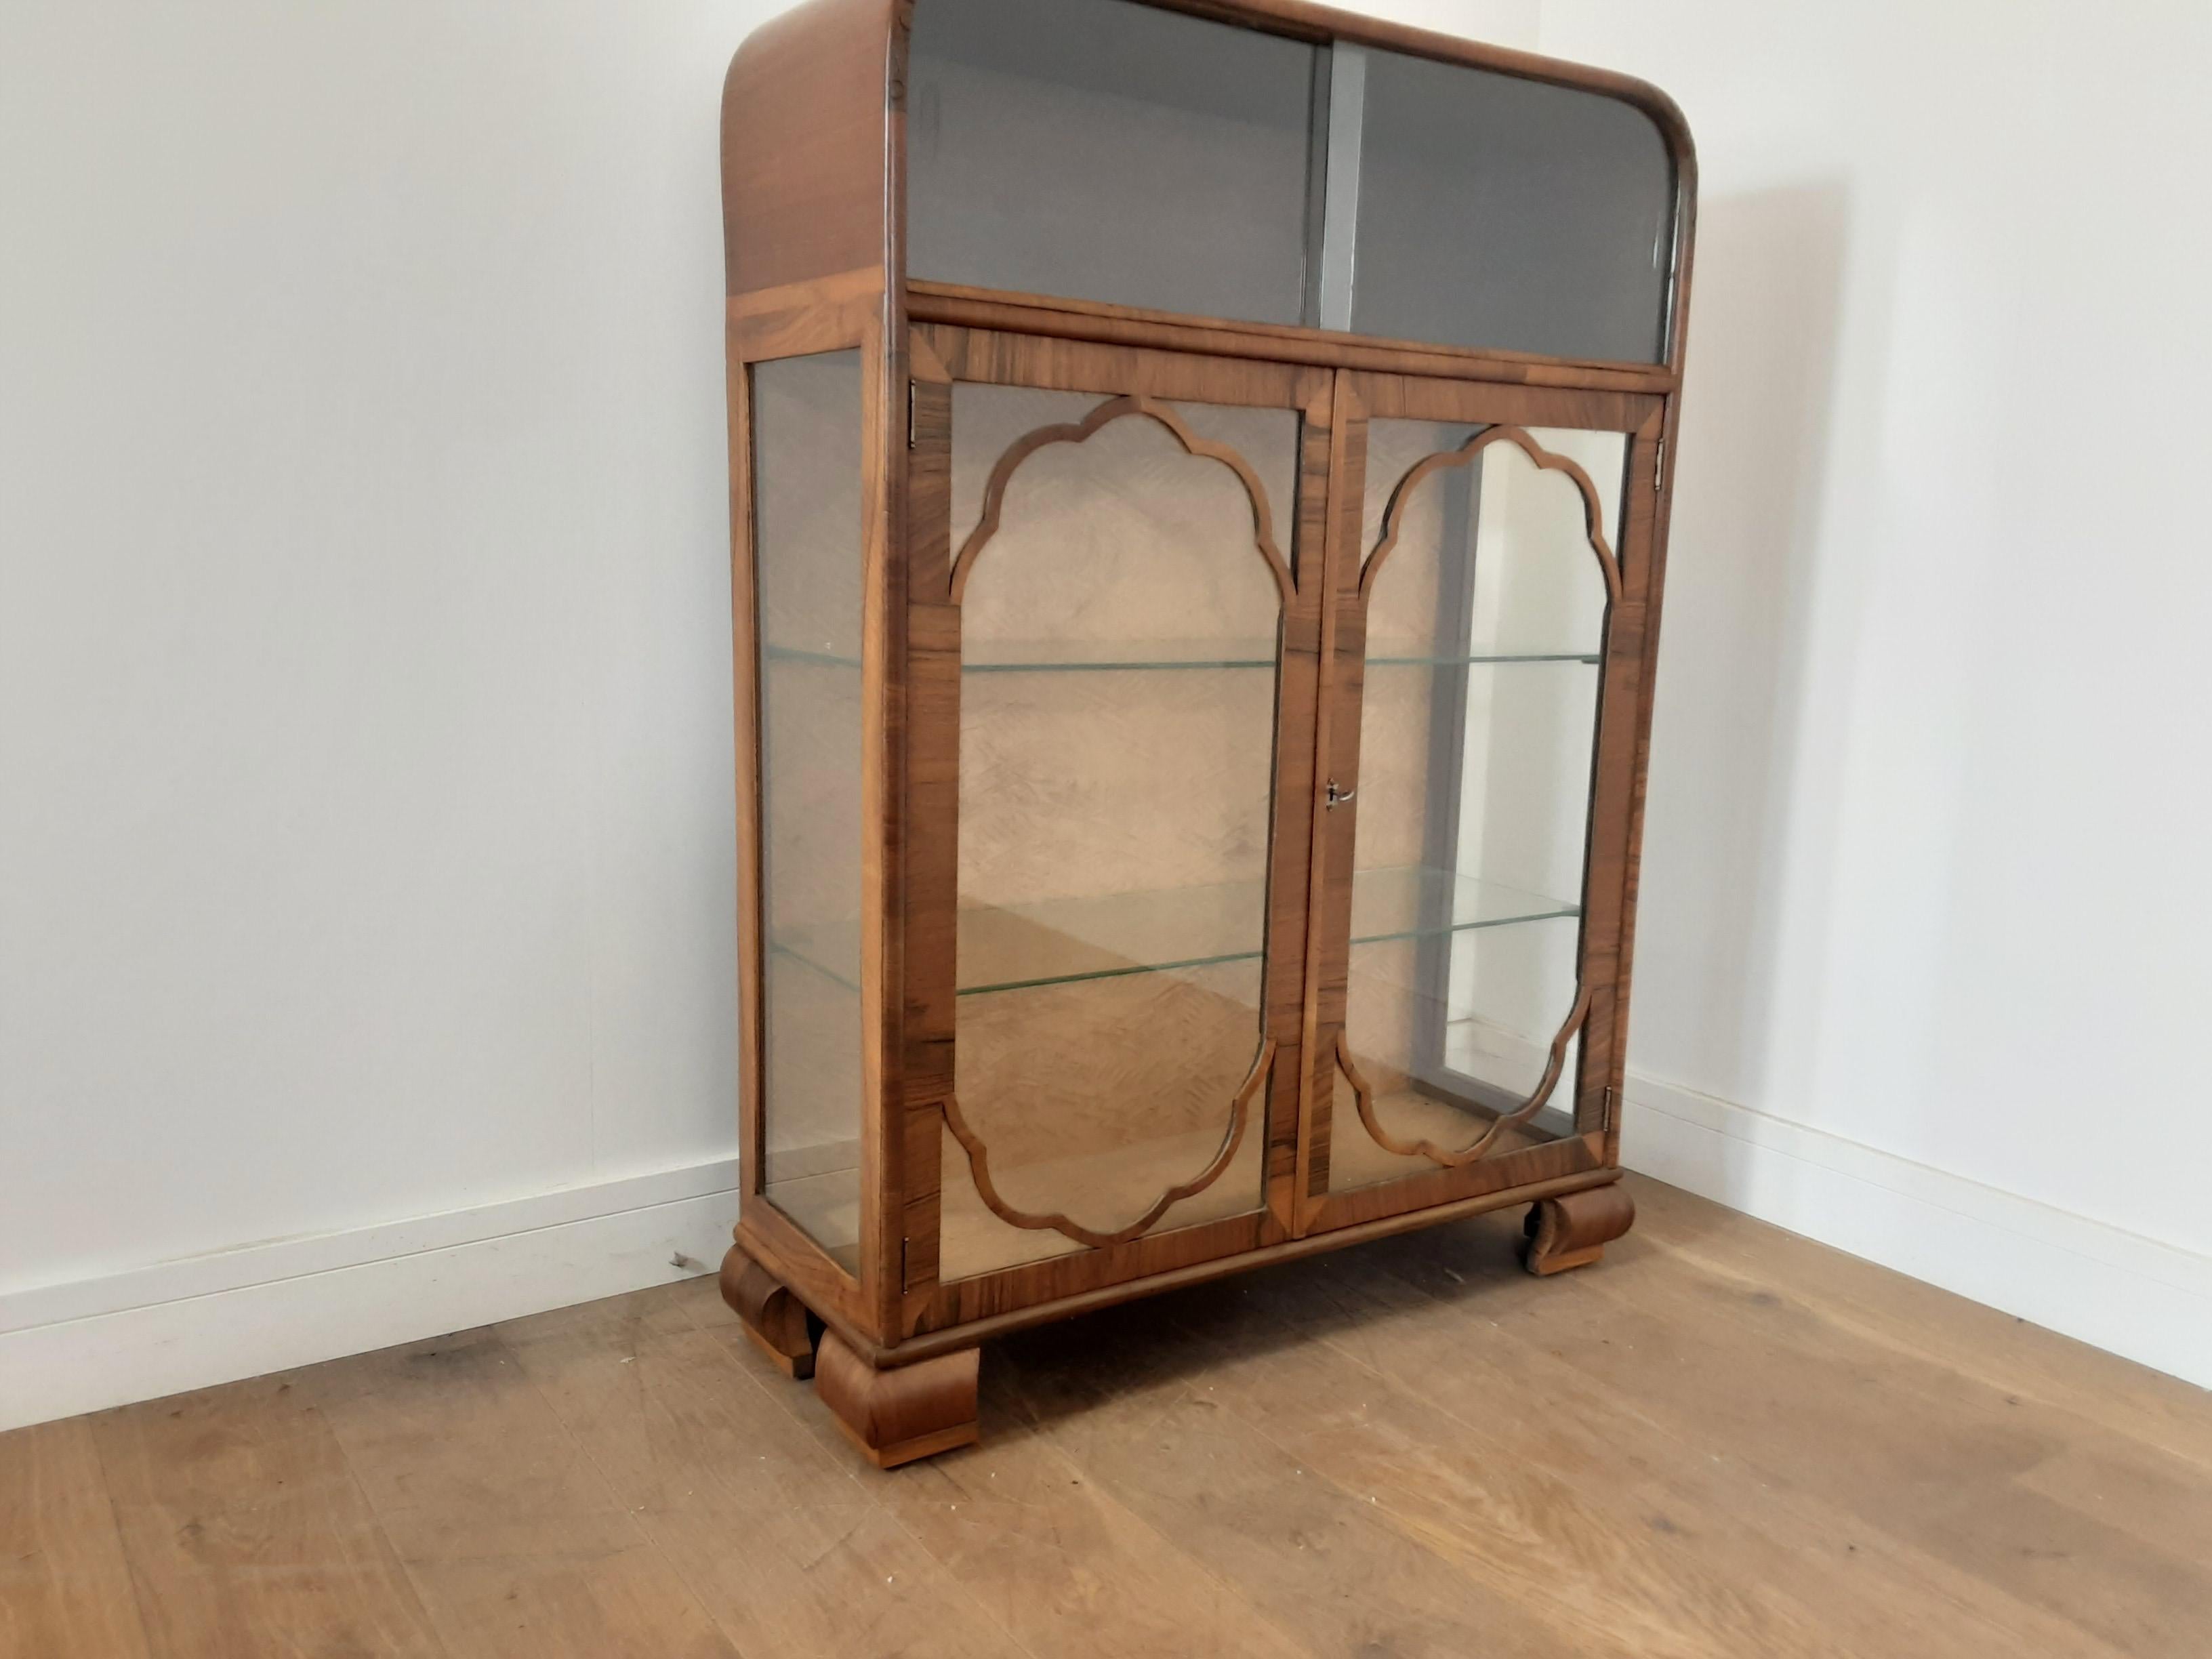 Art deco vitrine with cloud fretwork to the glazed doors, curved edges to the top with carved design, top shelf with glazed doors.
This makes a very good display cabinet bookcase with the glazed sides allowing plenty of light.
Measures: 119 cm H,